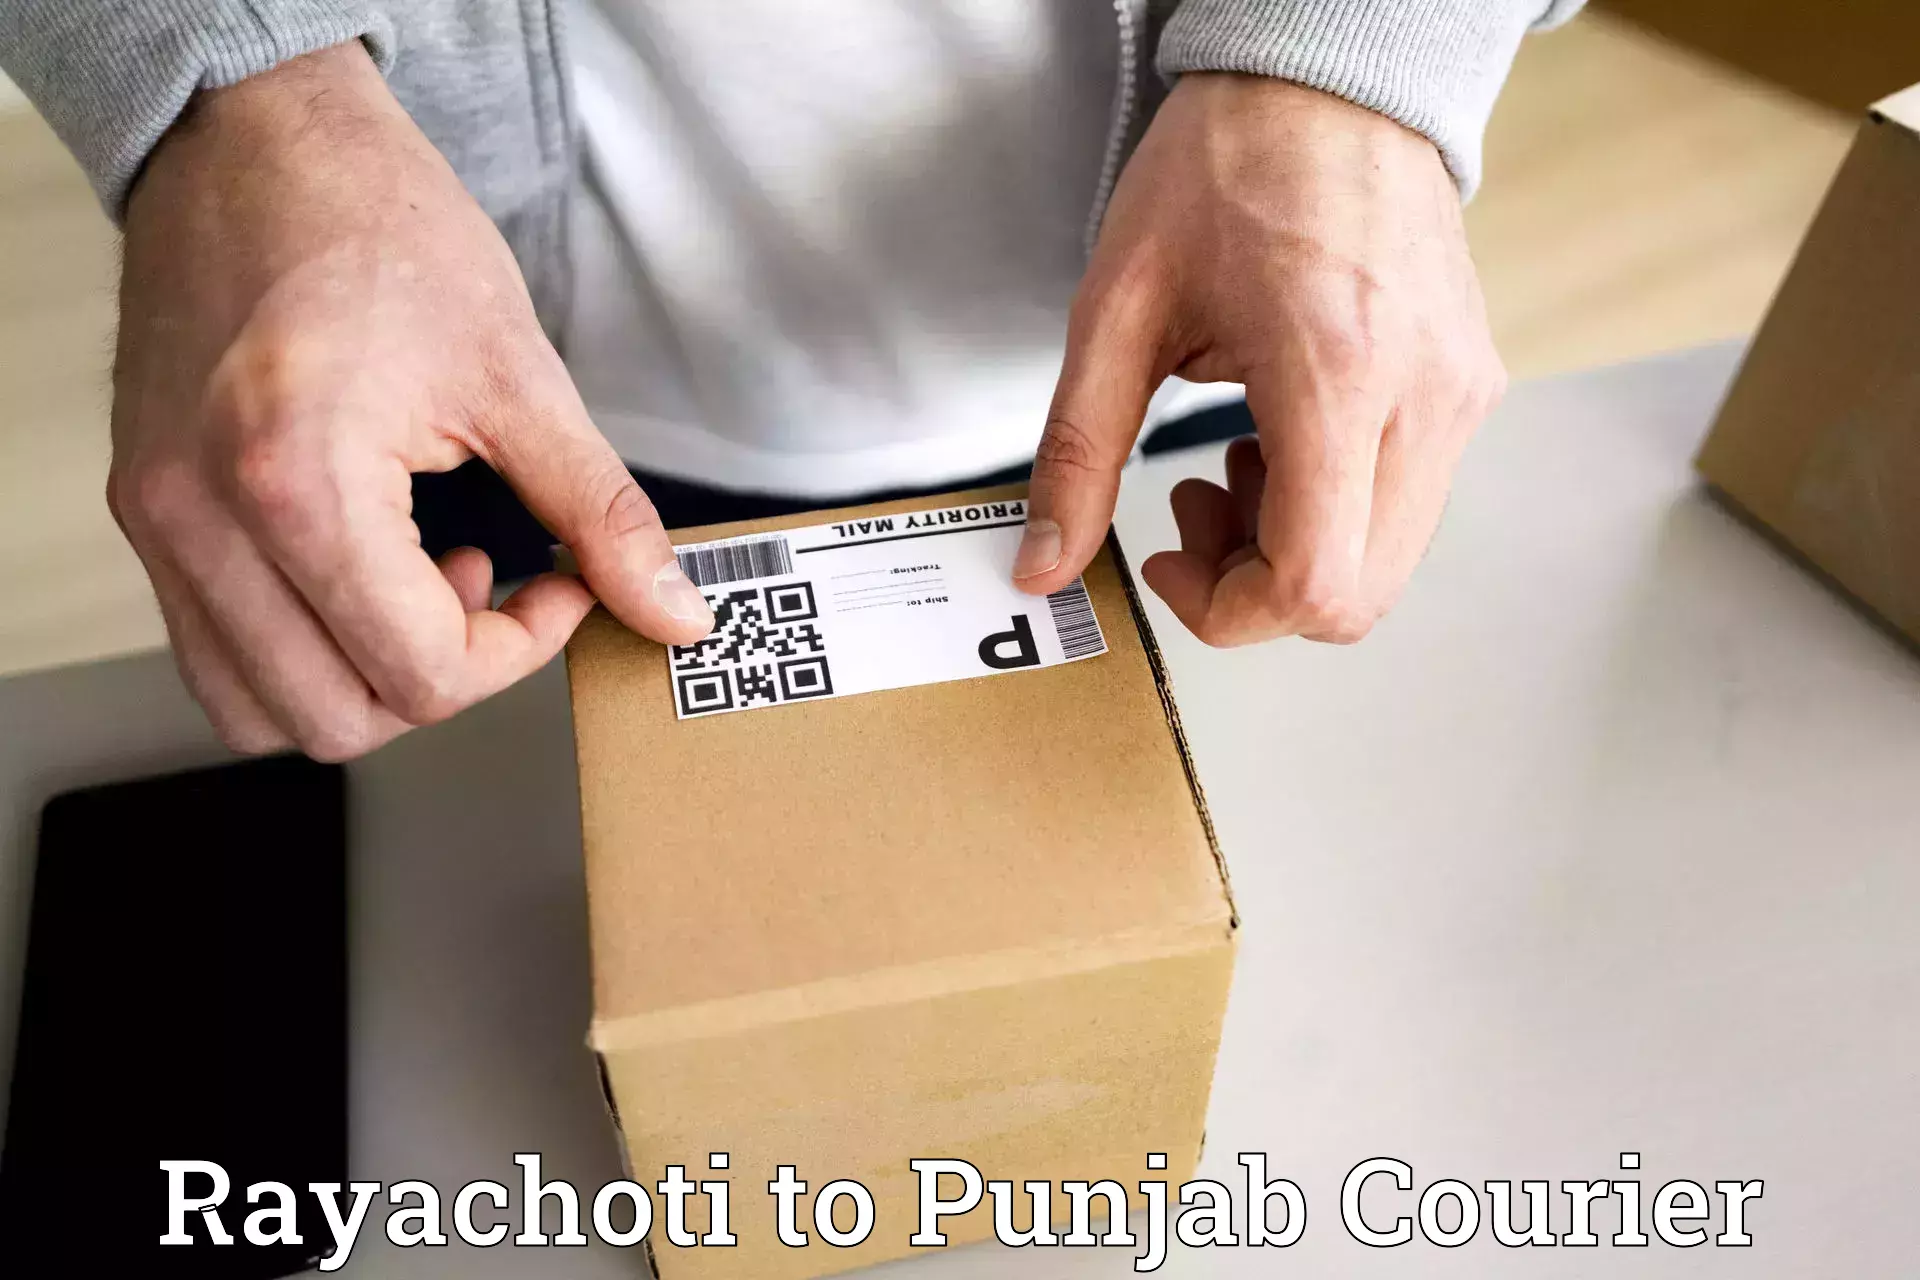 Quality courier services Rayachoti to Mohali